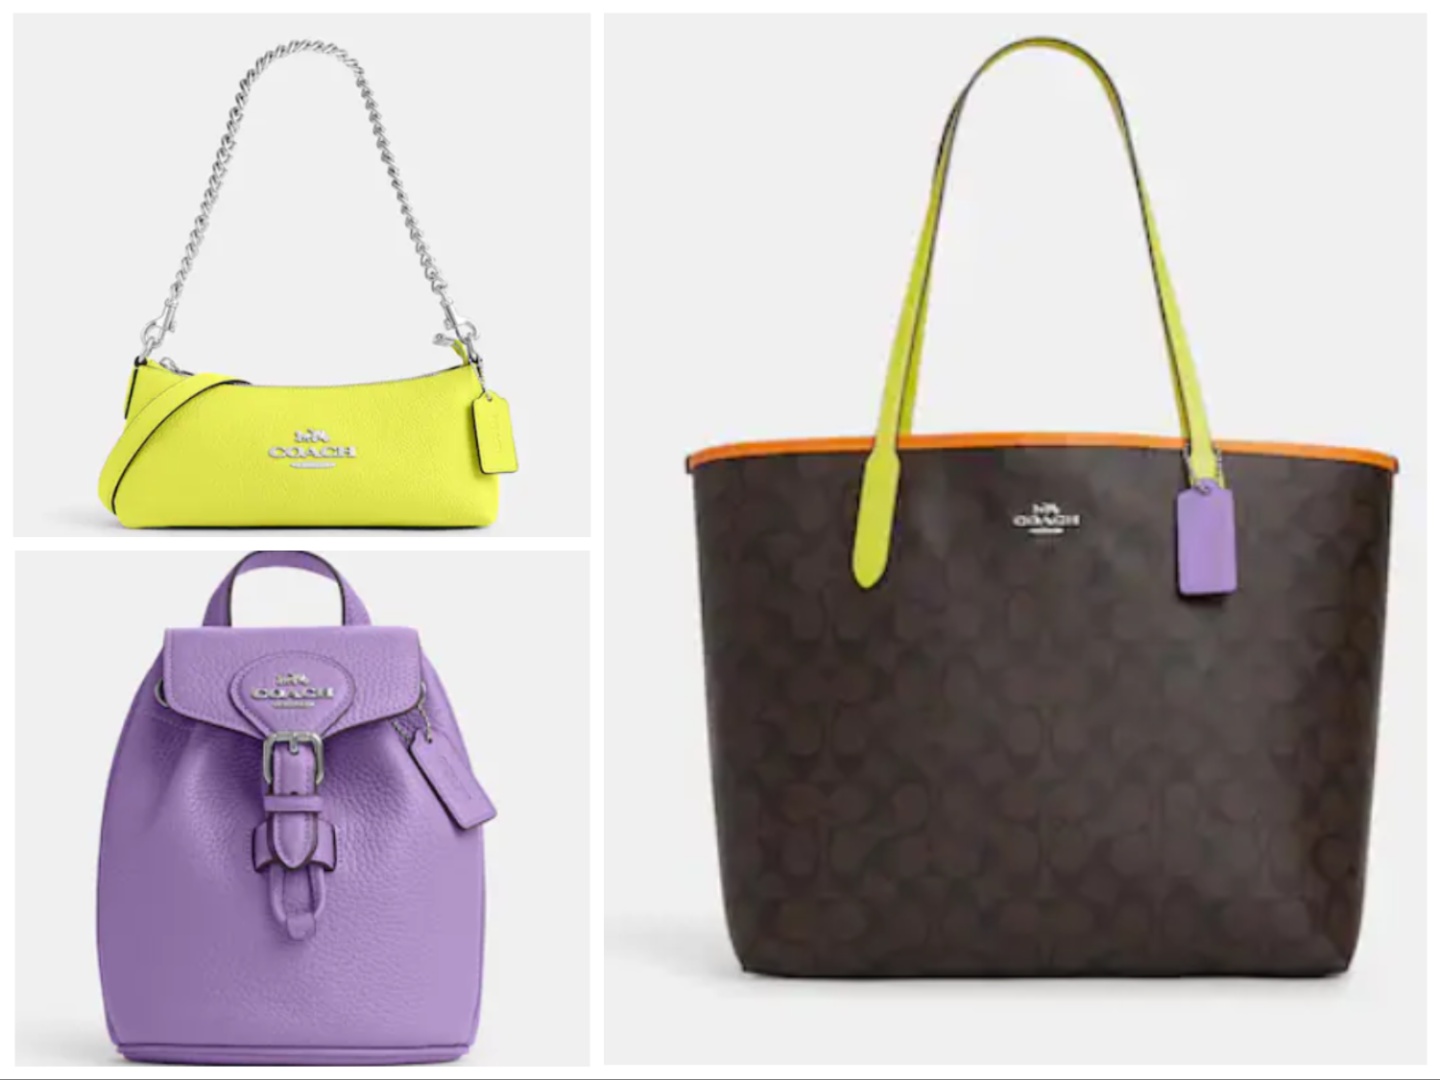 Coach Outlet spring savings has up to 70% off luxury handbags, shoes,  wallets and more 